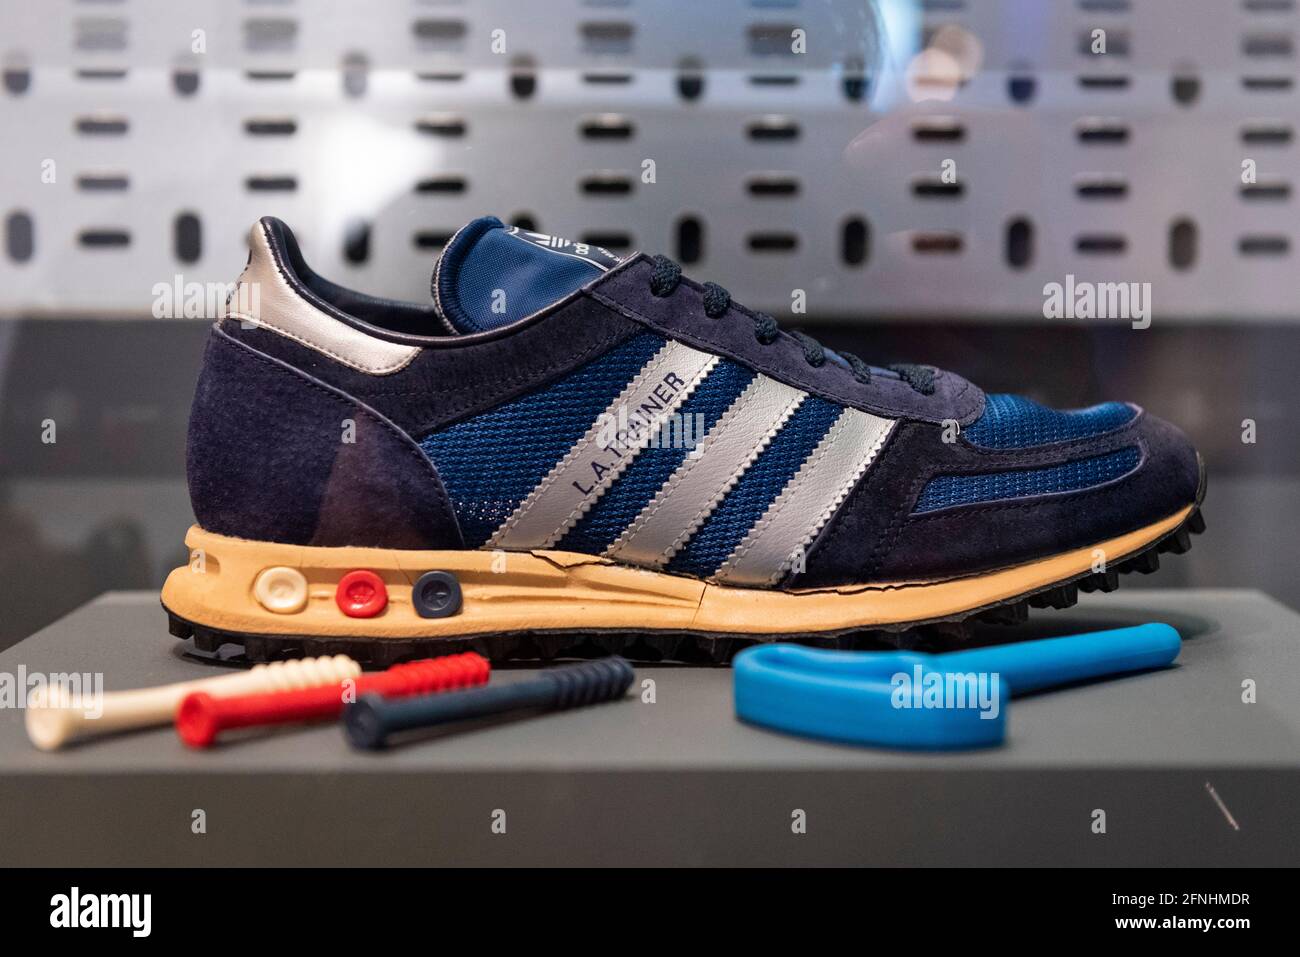 Additive Fore type Onset London, UK. 17 May 2021. "Adidas L.A. trainer", 1985. First released 1984.  With Vario Shock Absorption System pegs. Preview of “Sneakers Unboxed:  Studio to Street” at the Design Museum in Kensington. The